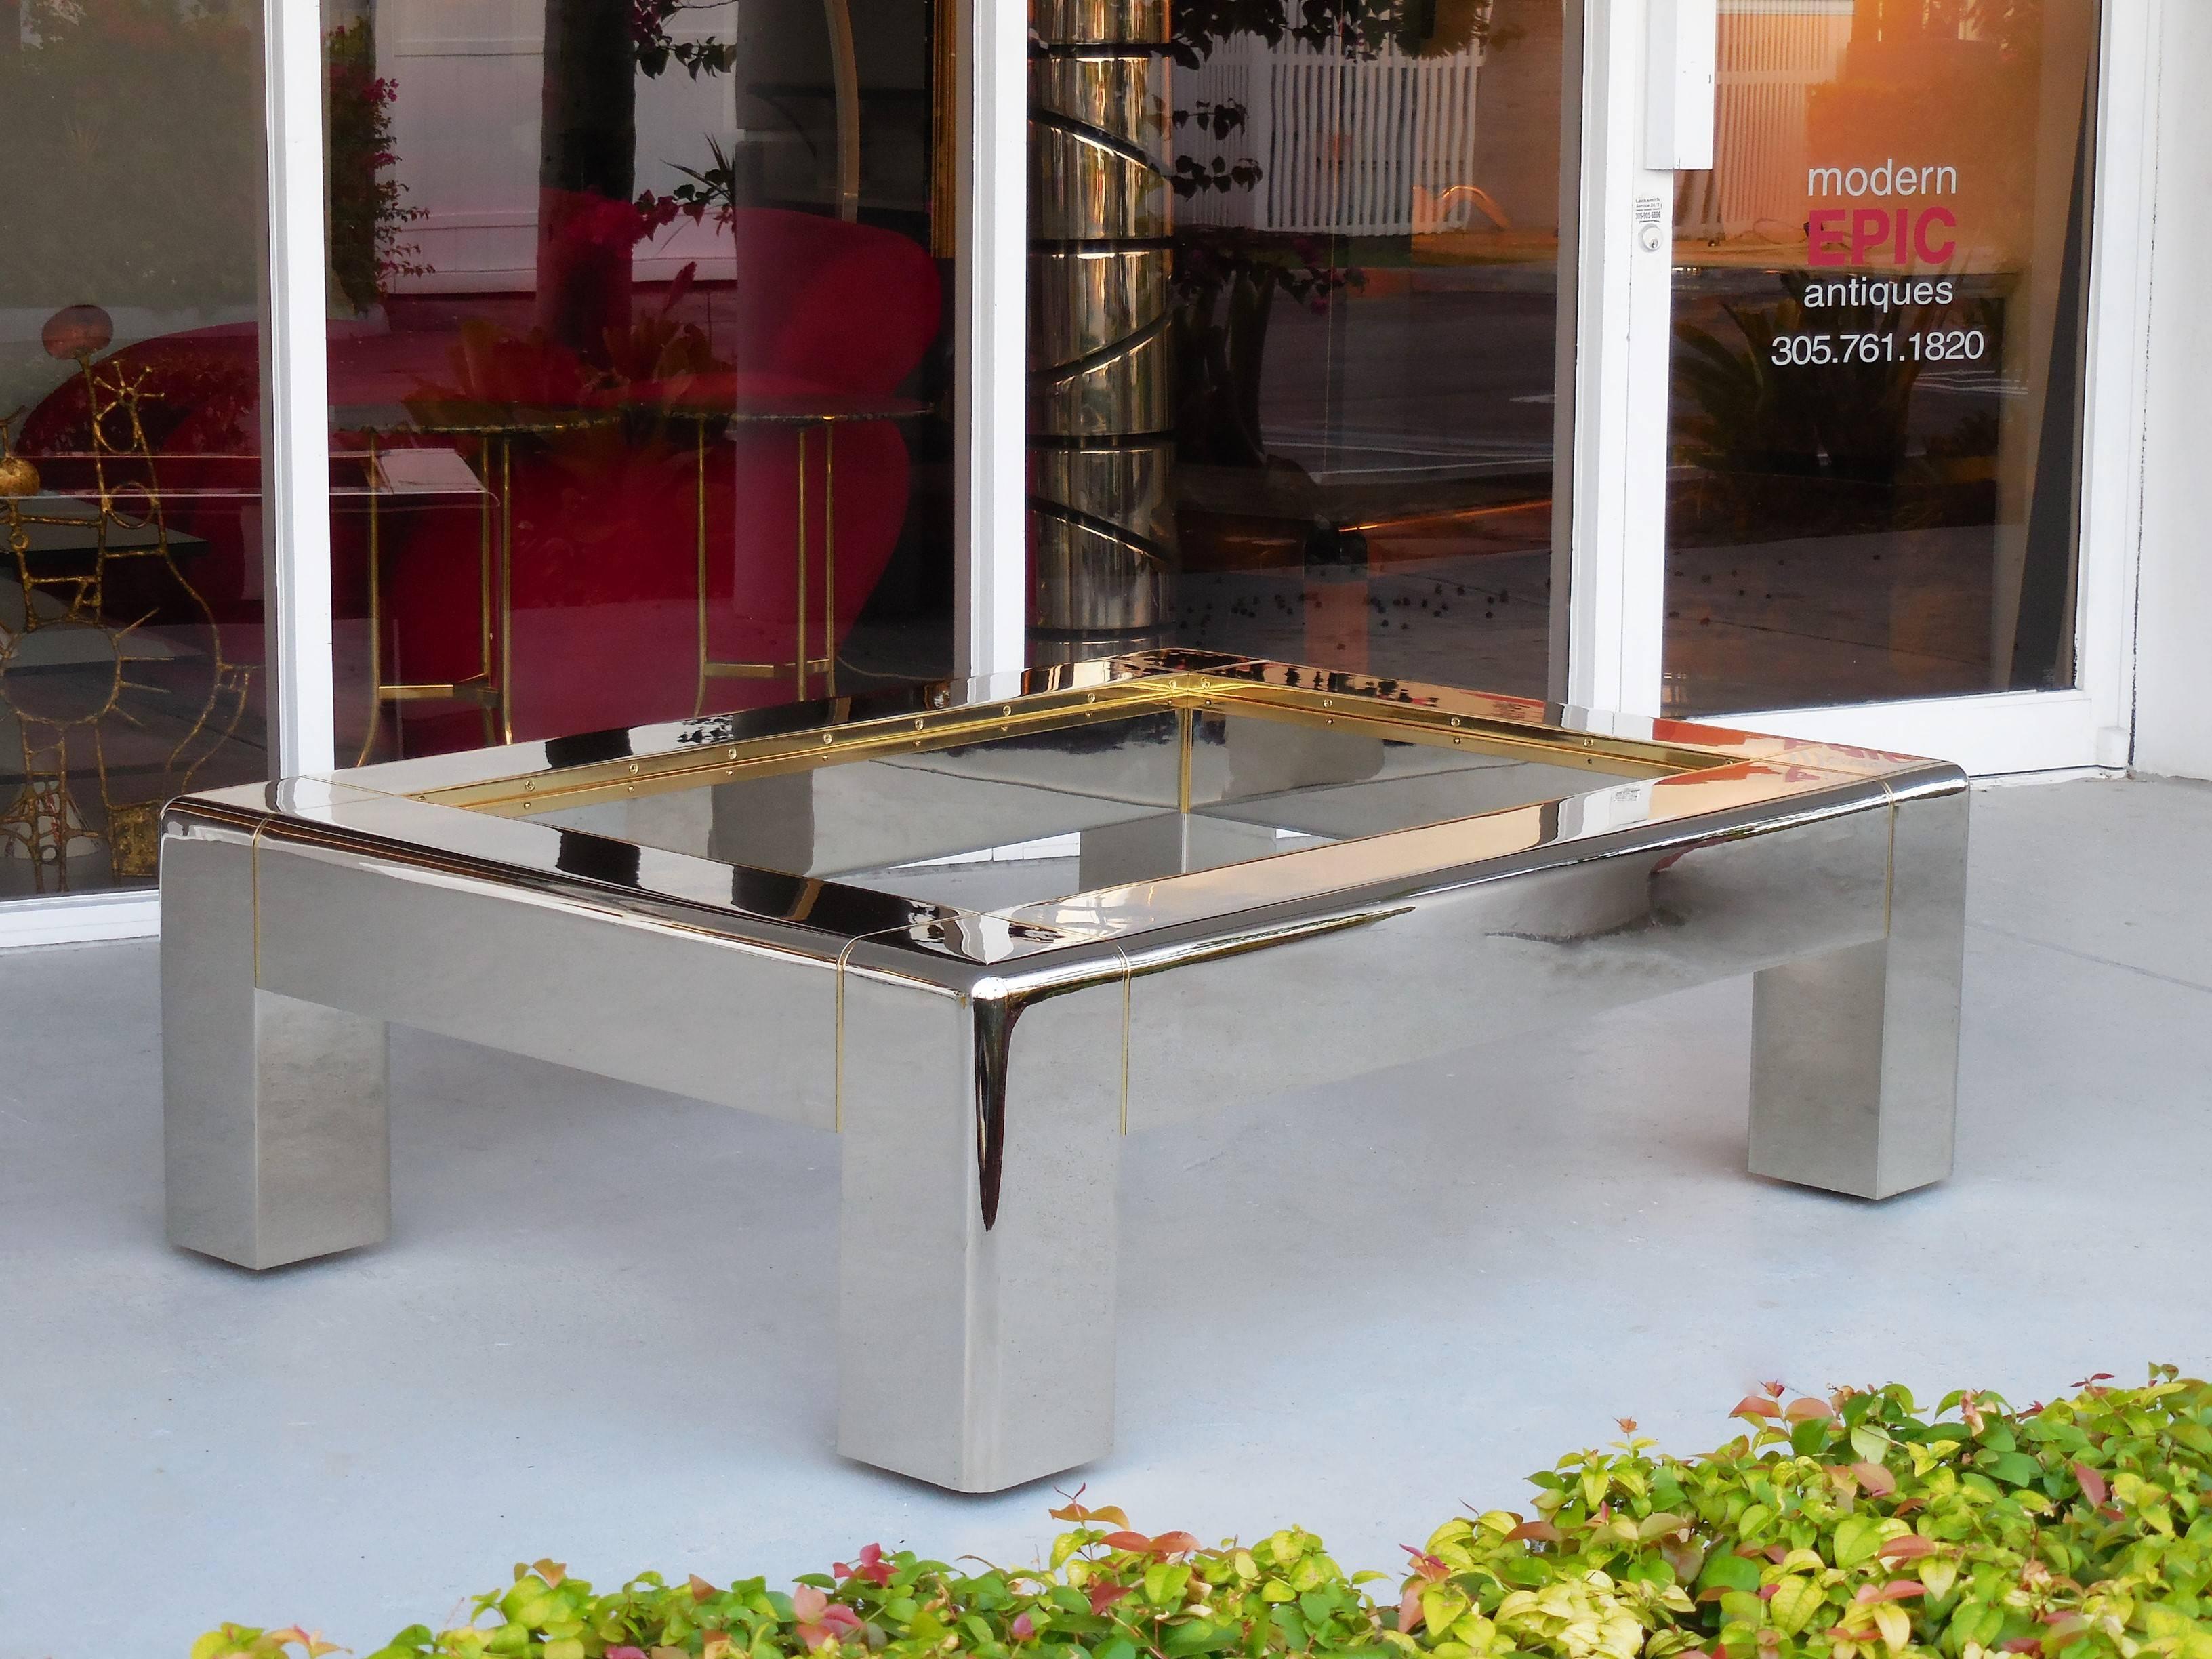 Superb coffee table by Karl Springer, nickel on bronze with polished bronze accents. Comes with new glass top (shown without glass top in pictures).